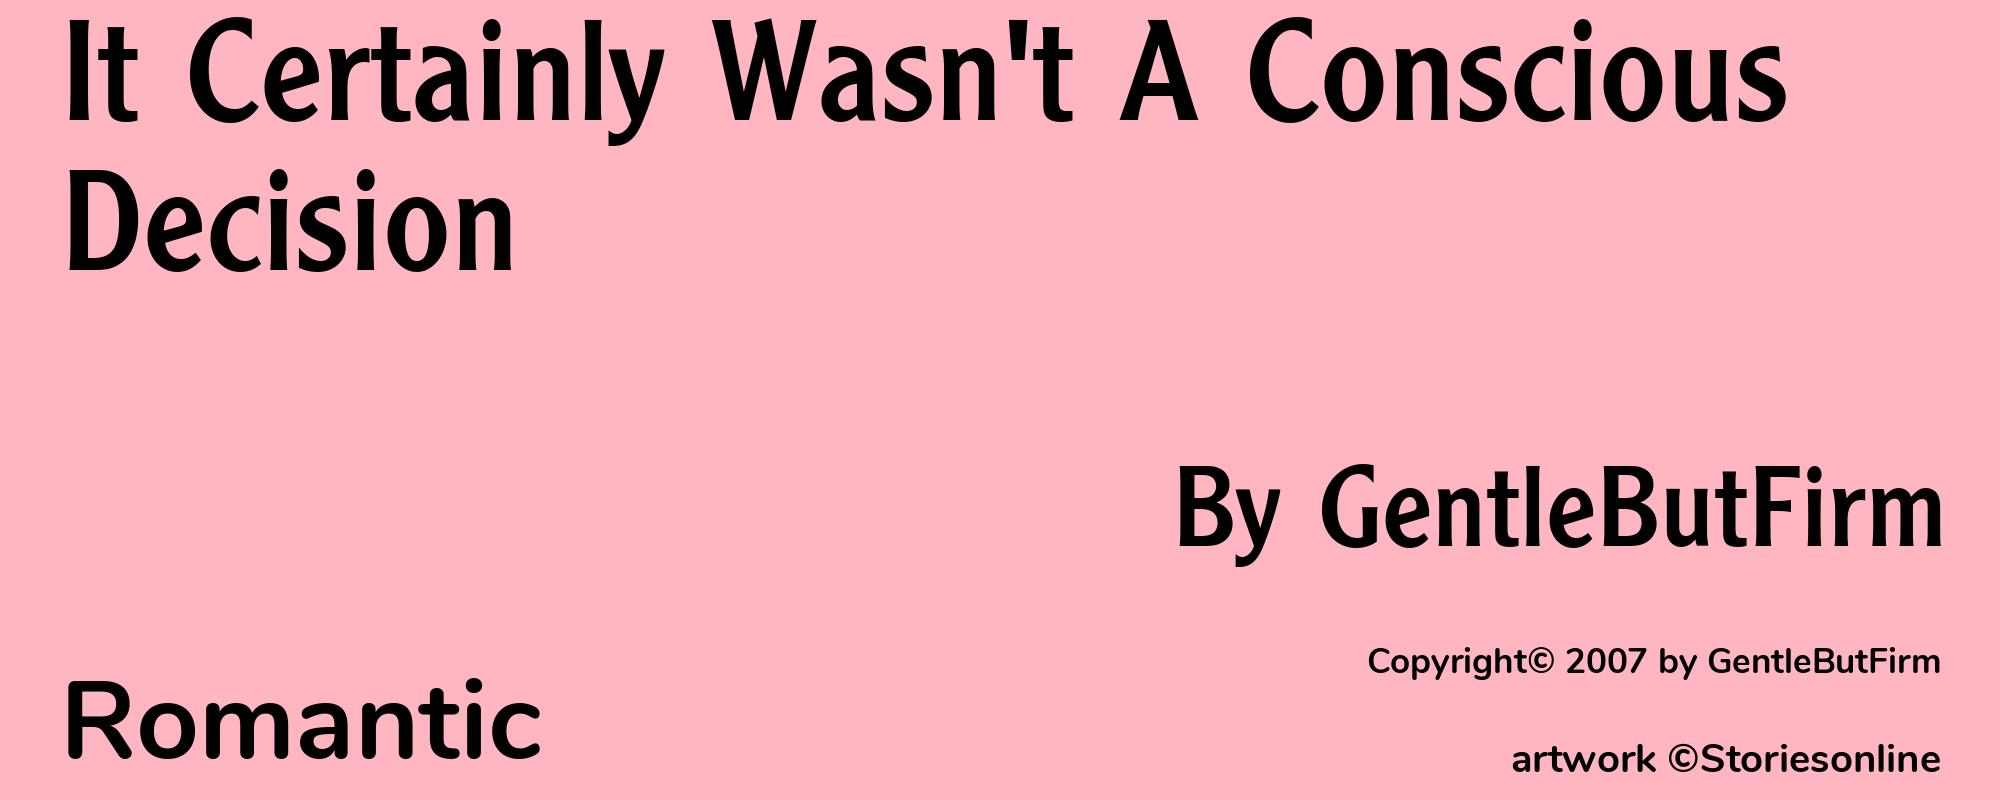 It Certainly Wasn't A Conscious Decision - Cover